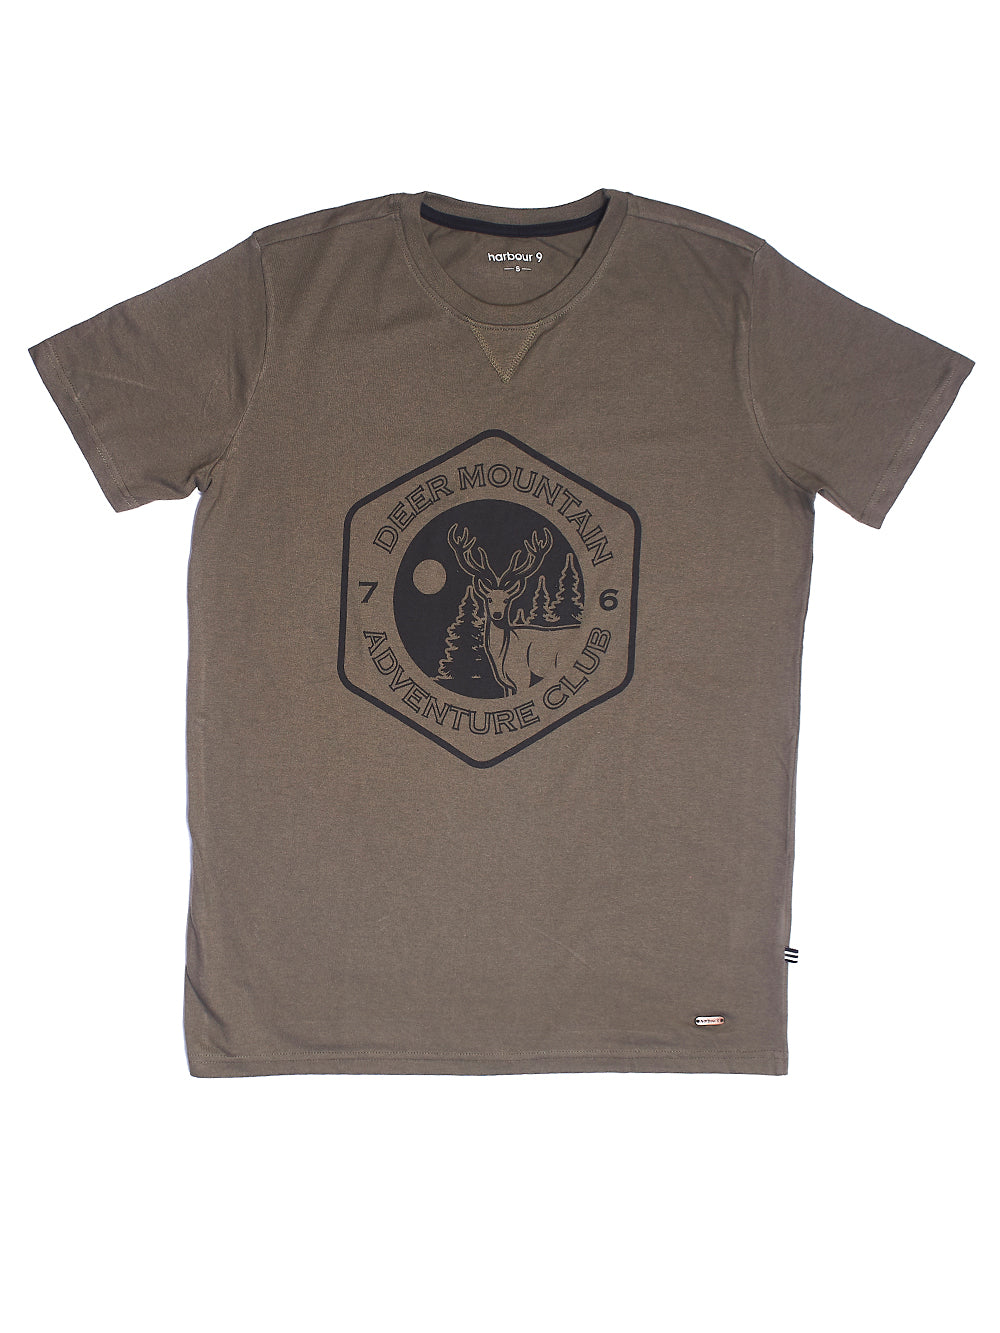 The Guarulhos T-shirt Olive For Men